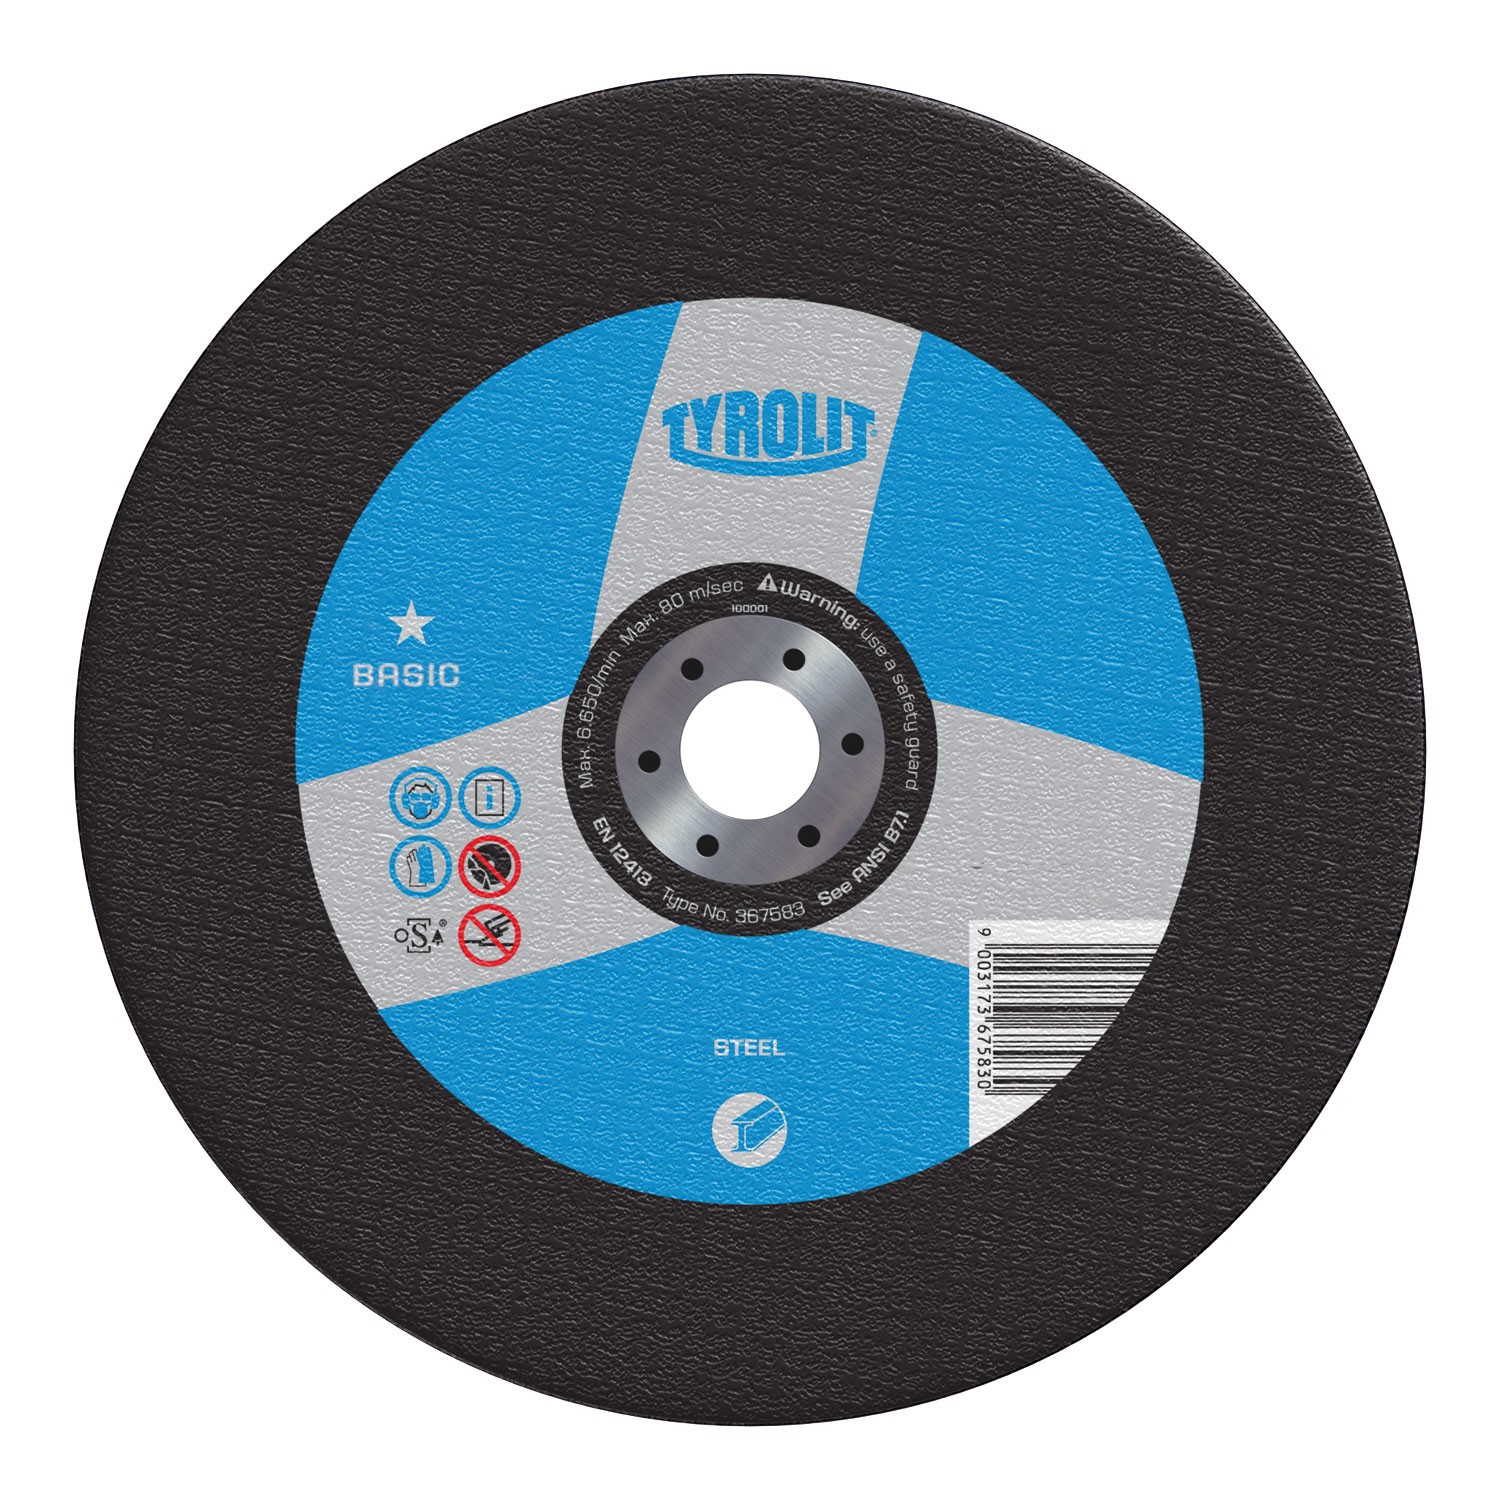 Tyrolit BASIC Chop Saw Wheels for Steel-Type 1 - Abrasives - Products